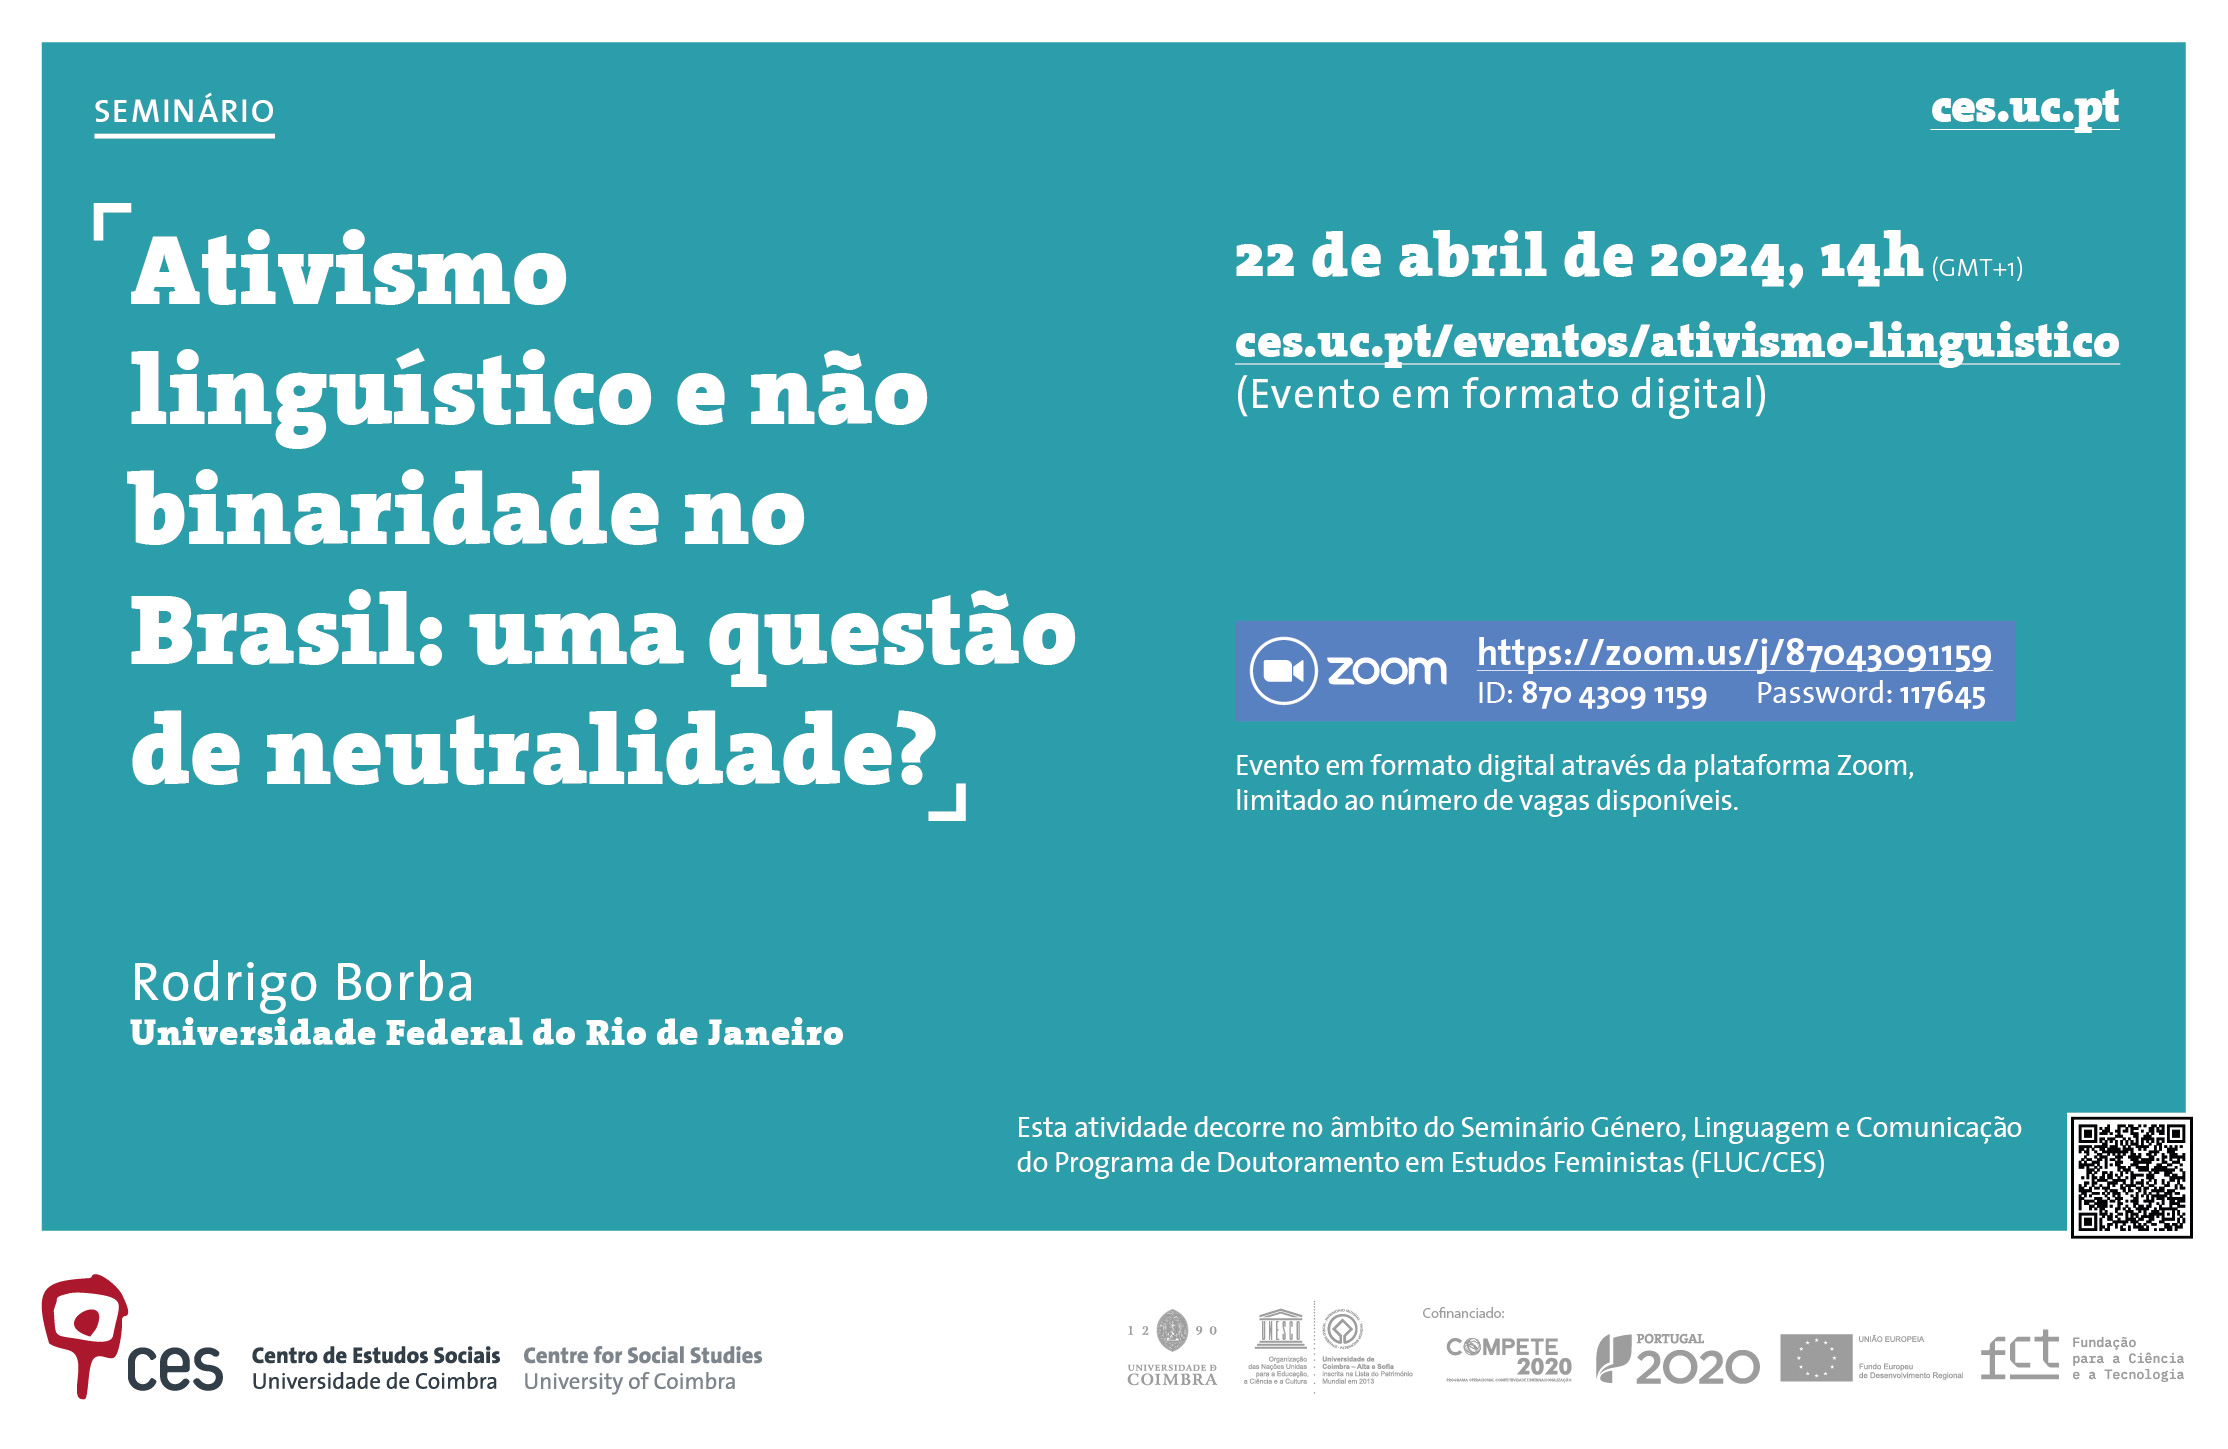 Linguistic activism and non-binarity in Brazil: a question of neutrality? <span id="edit_45354"><script>$(function() { $('#edit_45354').load( "/myces/user/editobj.php?tipo=evento&id=45354" ); });</script></span>